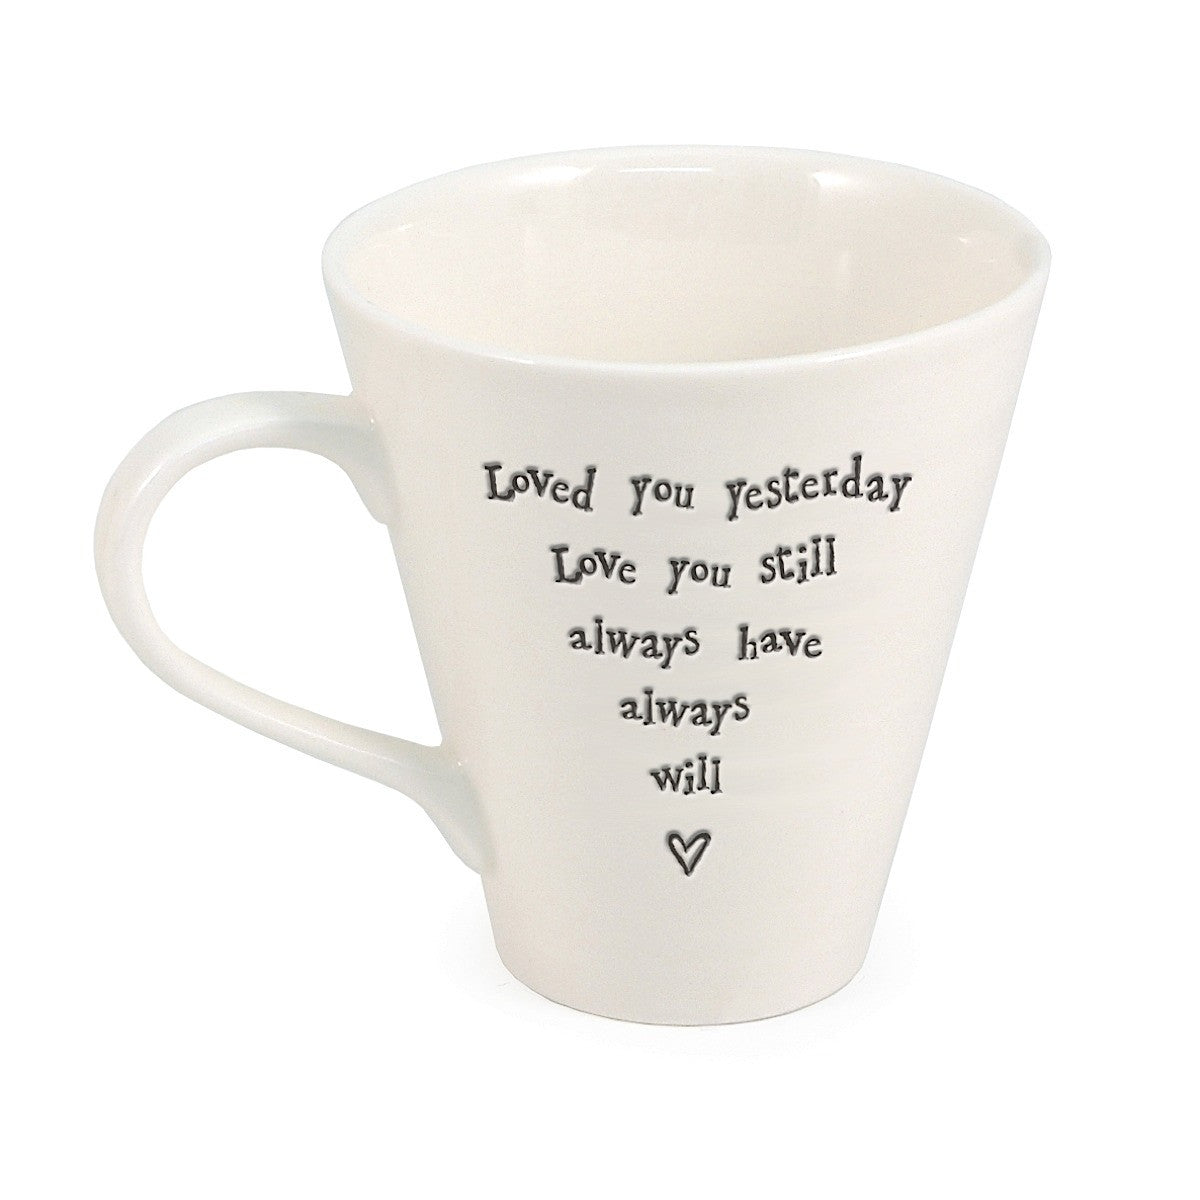 Porcelain Mug - Loved You Yesterday | More Than Just at Gift | Narborough Hall